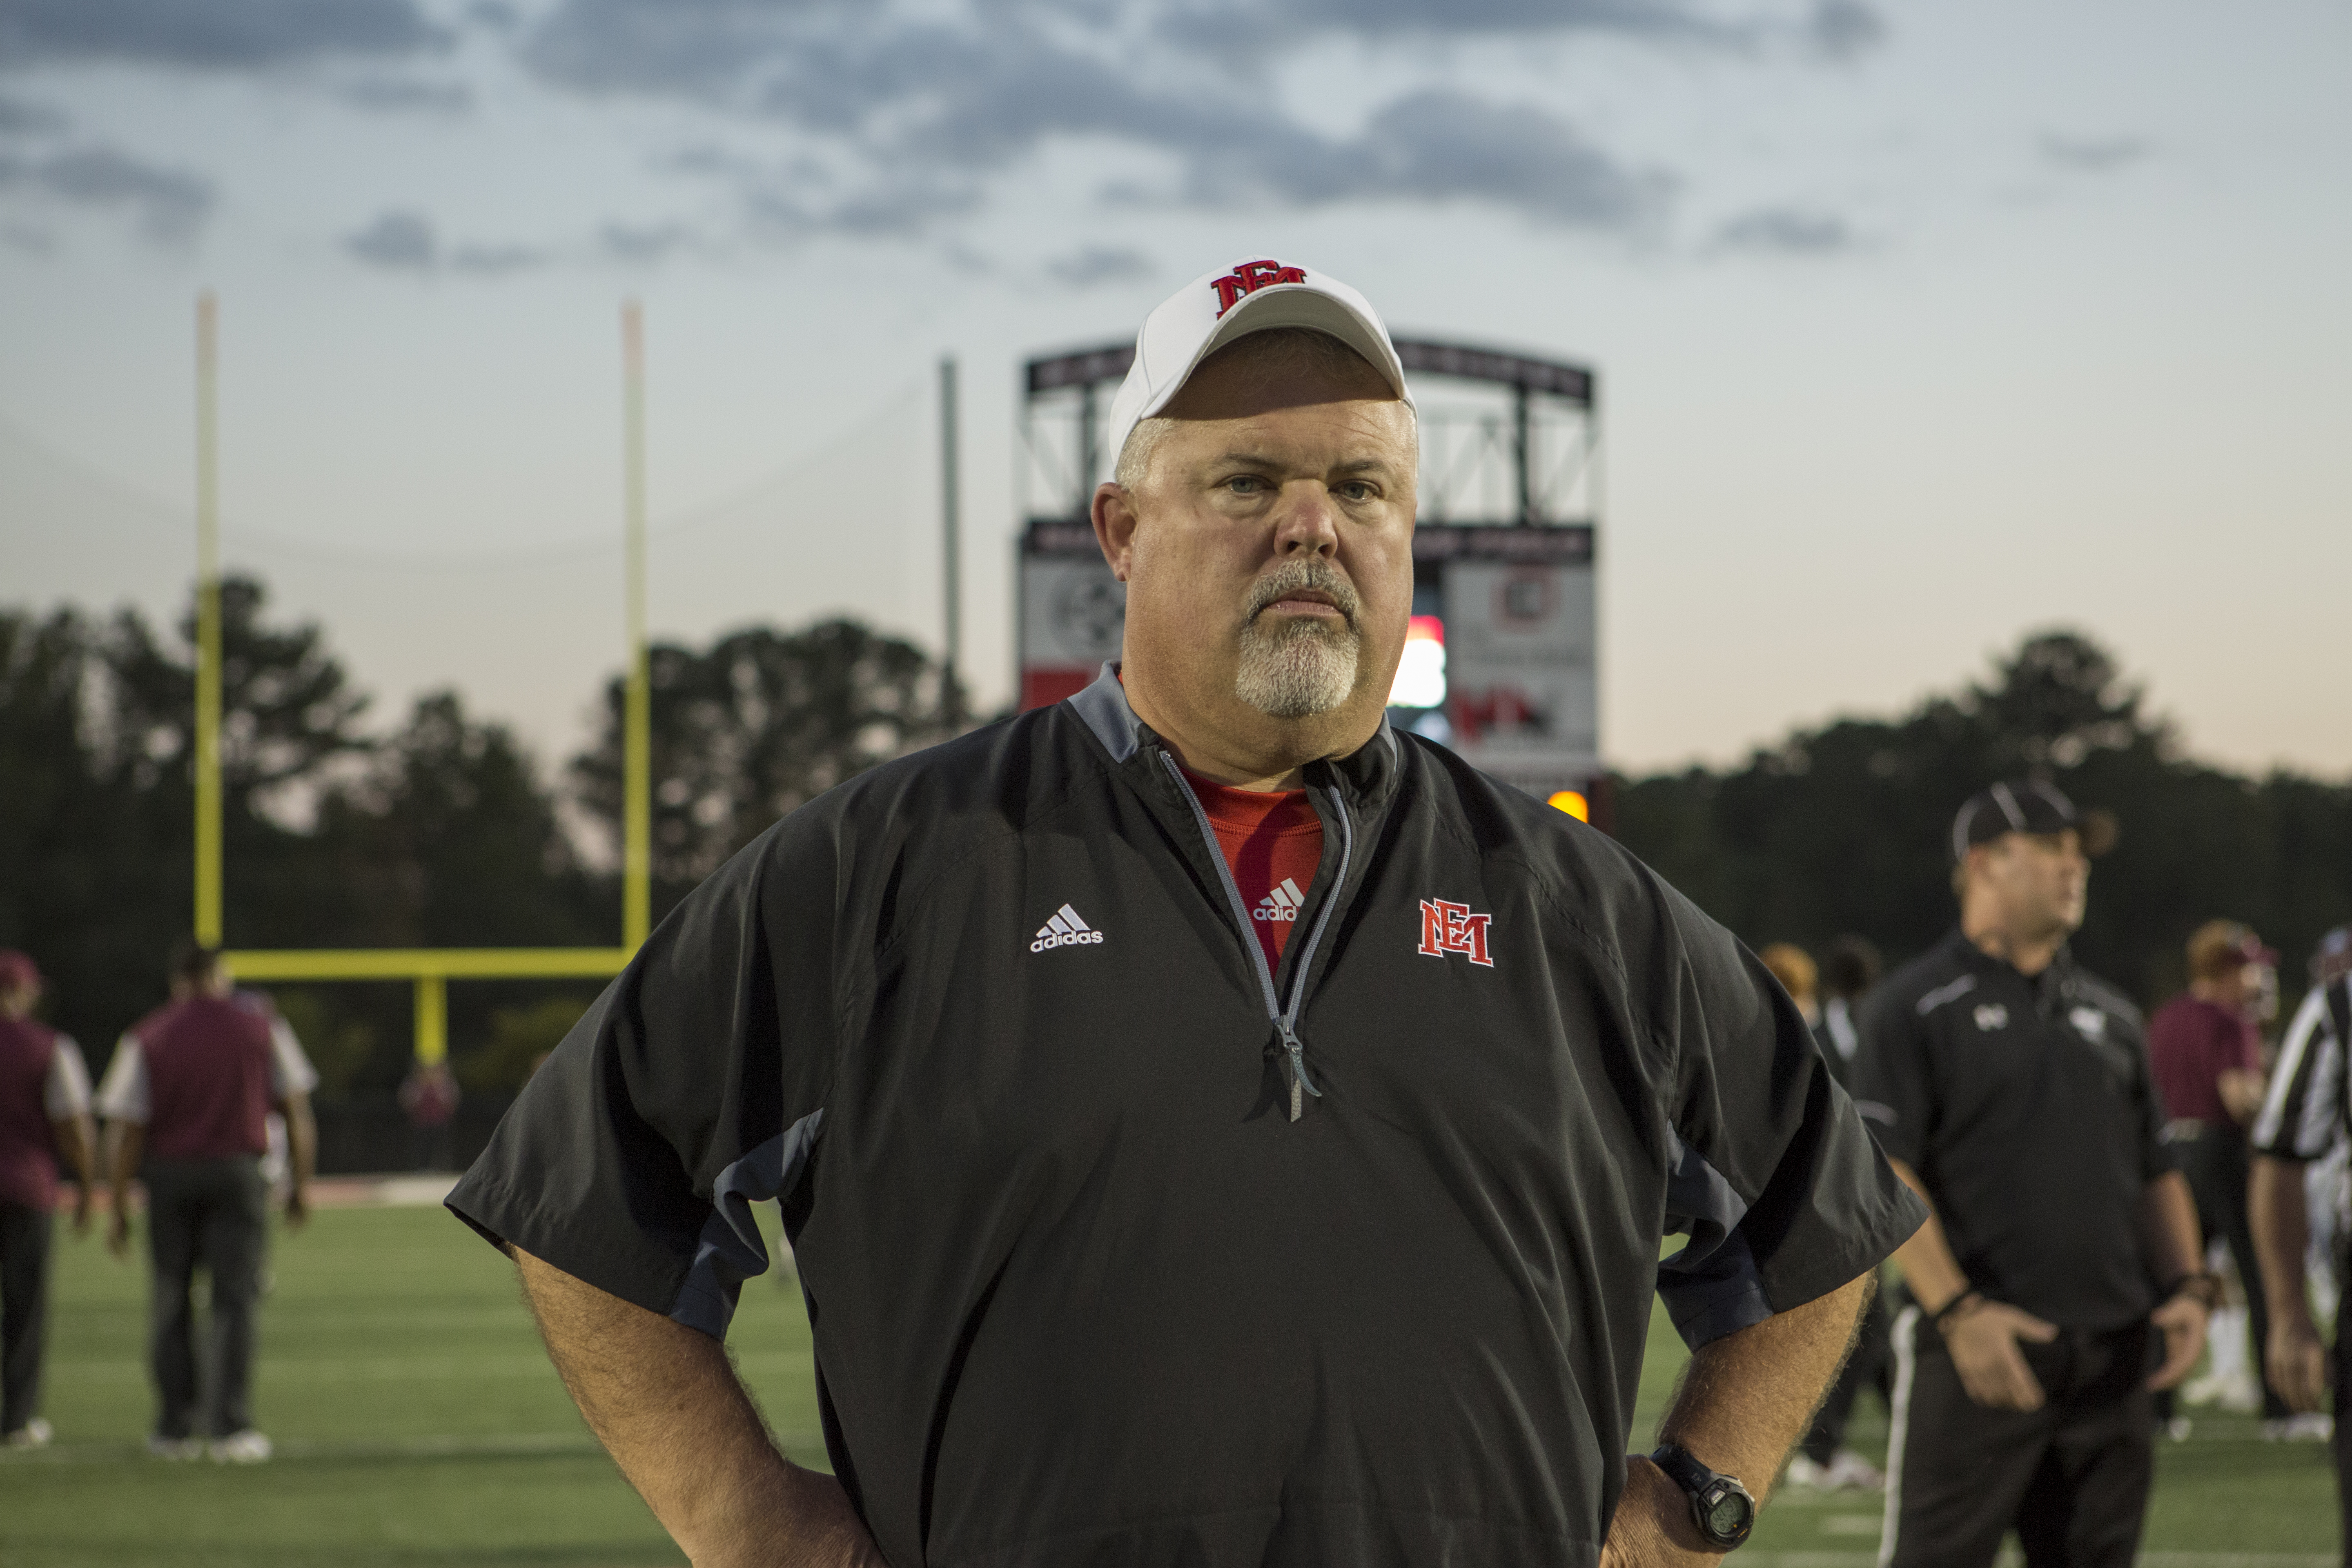 The coach at 'Last Chance U' doesn't want the show to leave Scooba